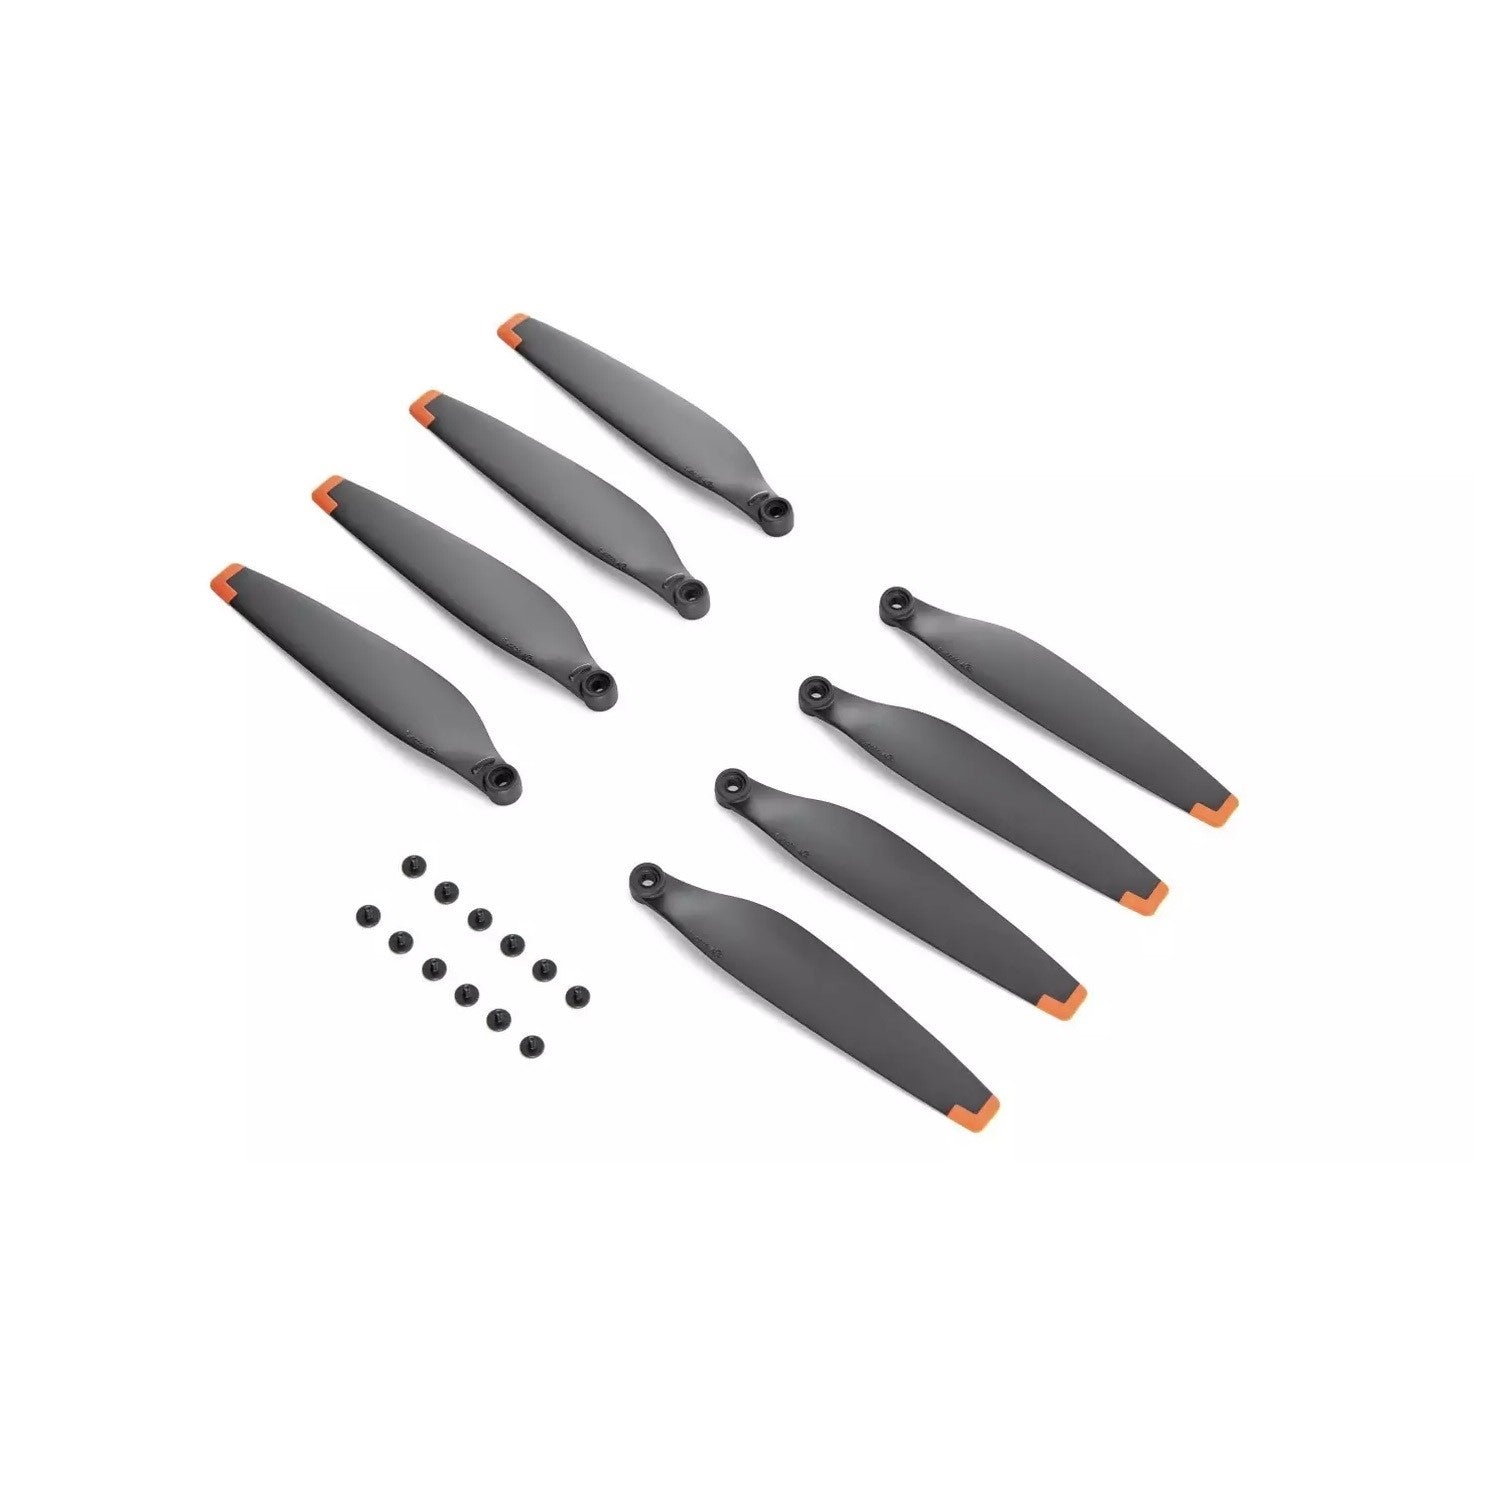 DJI Mini 3 Pro Fly More Accessory Kit for drone